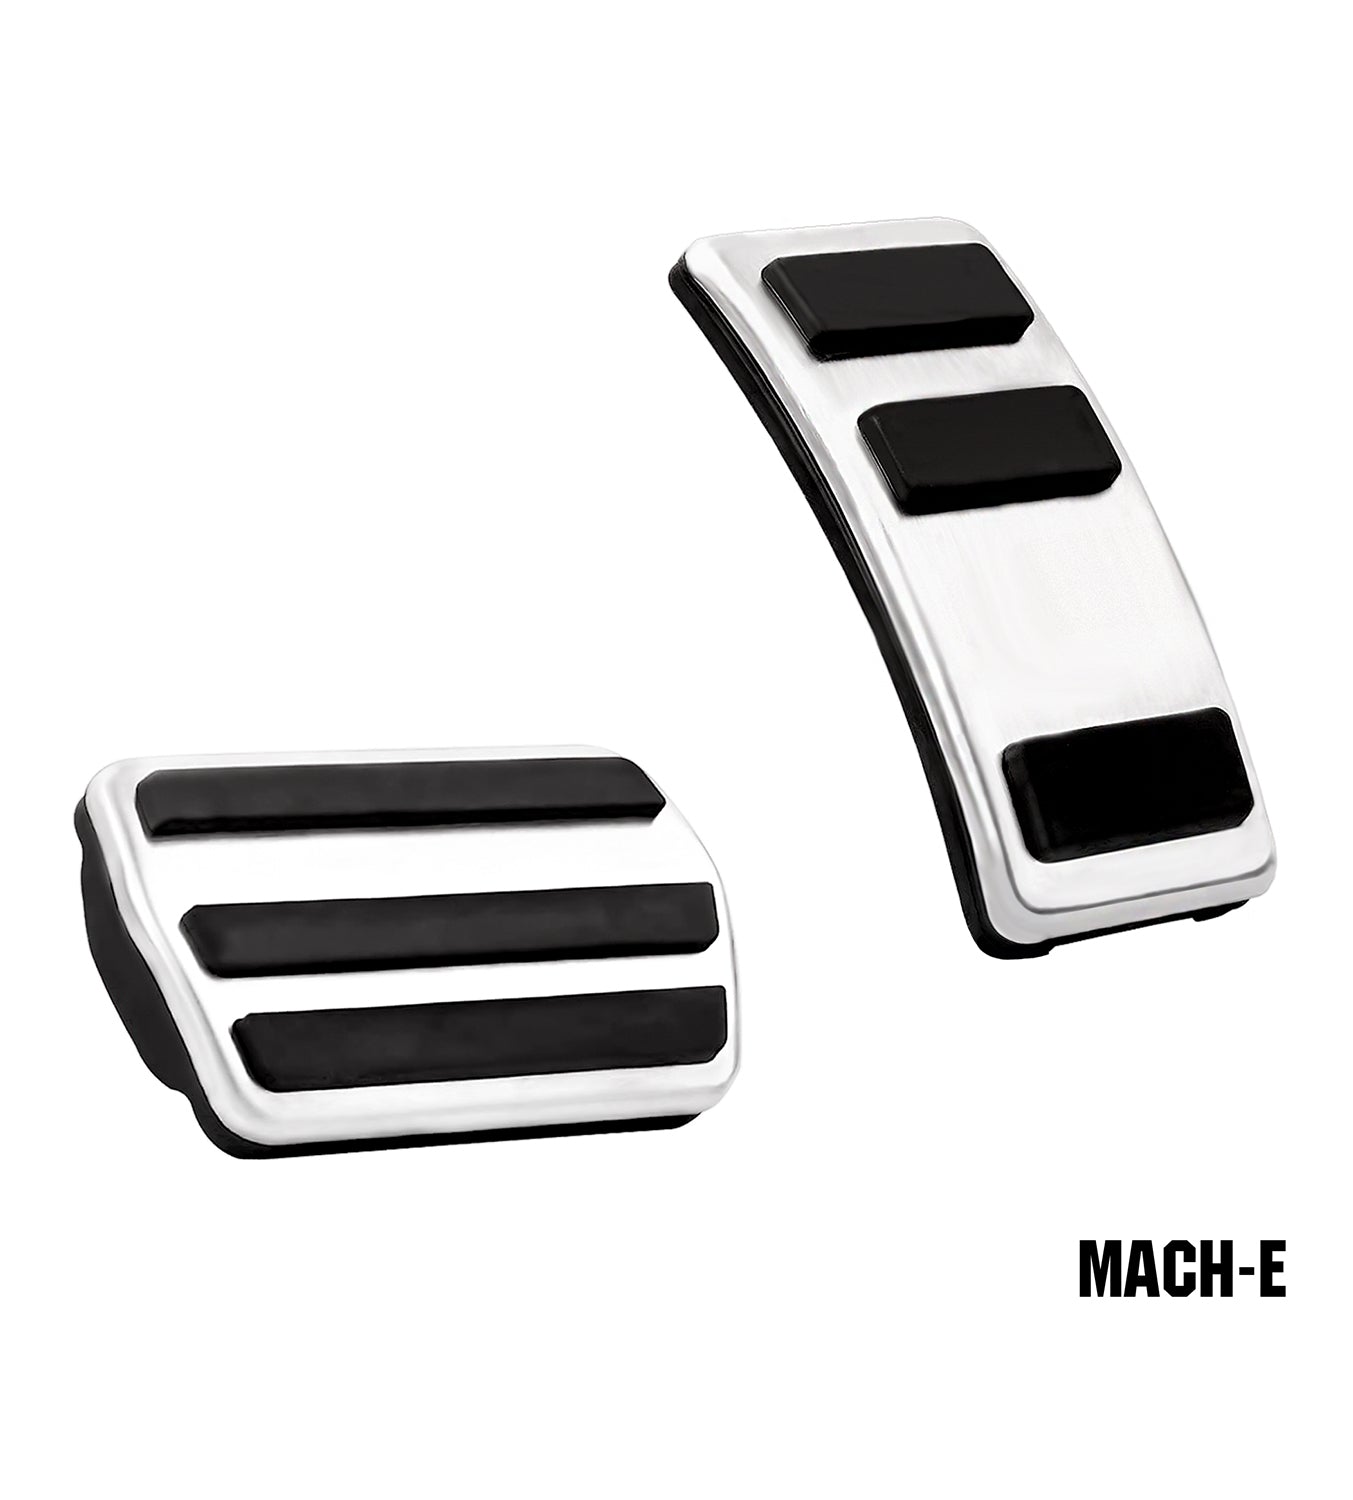 Foot Pedals Pads,Non-Slip Performance Foot Pedals Auto Aluminum Pedal Covers Accessories Brake&Accelerator Pedals Set Compatible with Mustang Mach-E(A Set of 2) Silver